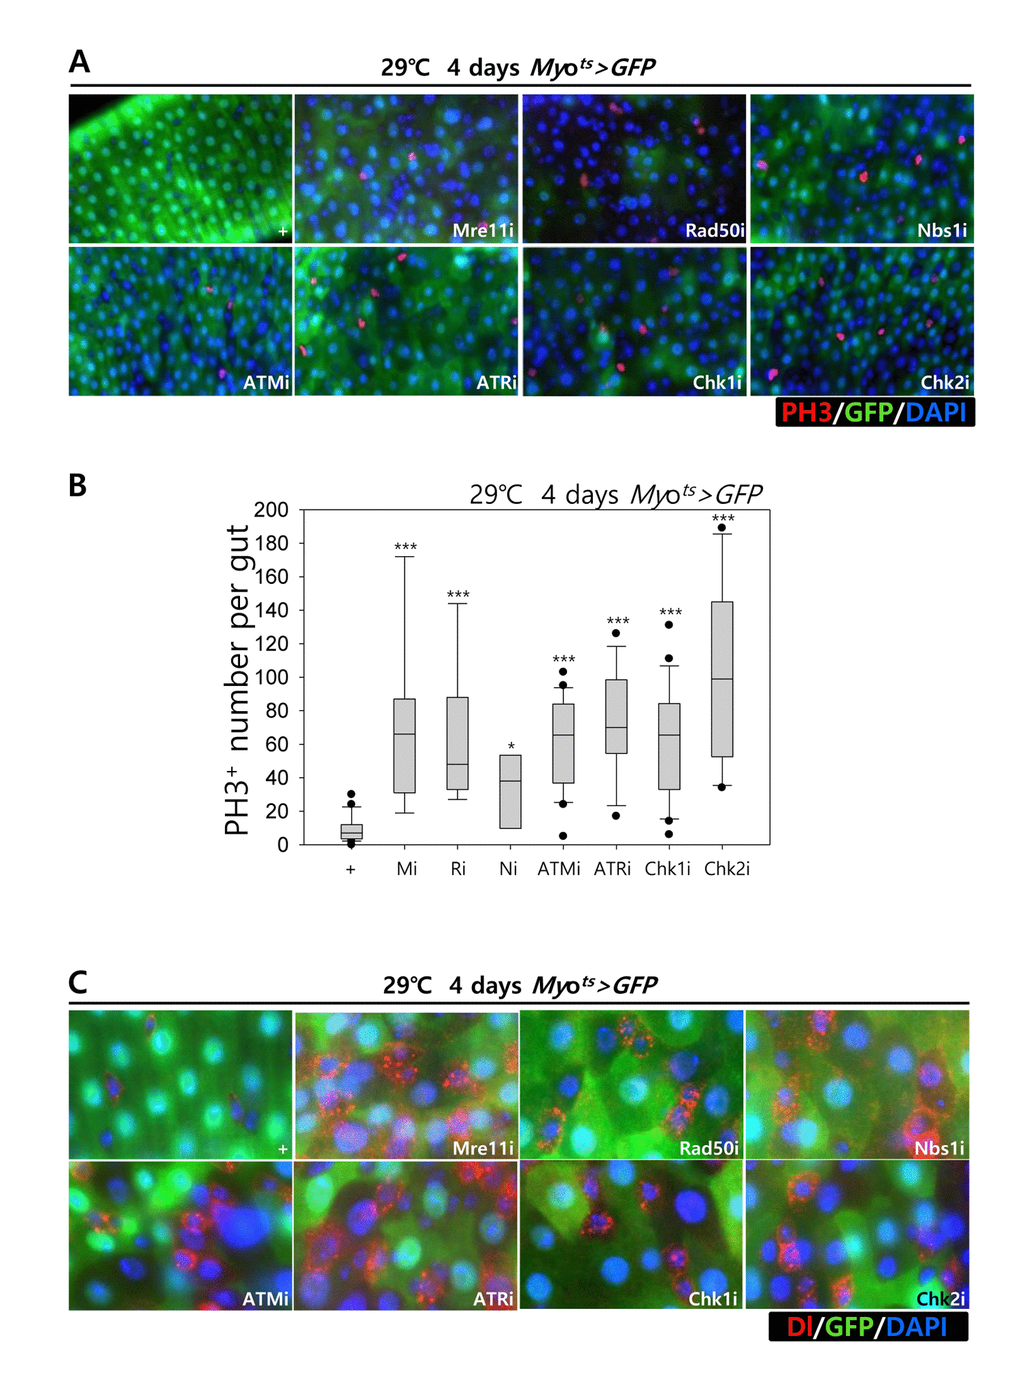 Effects of the knockdown of EC-specific DNA damage response (DDR)-related factors on ISC proliferation. (A-B) EC-specific knockdown of Mre11, Rad50, Nbs1, ATM, ATR, Chk1, or Chk2 induce ISC division. Flies carrying Myots>GFP, Myots>GFP+Mre11i, Myots>GFP+Rad50i, Myots>GFP+Nbs1i, Myots>GFP+ATMi, Myots>GFP+ATRi, Myots>GFP+Chk1i, or Myots>GFP+Chk2i genotypes were cultured at 29 °C for 4 days. The guts of flies were dissected and labeled with anti-GFP (green) and anti-PH3 (red) antibodies and DAPI (blue). Original magnification is 400×. (B) A graph showing the PH3+ cell number in the midgut with an EC-specific knockdown of Mre11, Rad50, Nbs1, ATM, ATR, Chk1, or Chk2. The gut specimens of Myots>GFP, Myots>GFP+Mre11i, Myots>GFP+Rad50i, Myots>GFP+Nbs1i, Myots>GFP+ATMi, Myots>GFP+ATRi, Myots>GFP+Chk1i, or Myots>GFP+Chk2i flies (kept at 29 °C for 4 days) were labeled with anti-GFP (green) and anti-PH3 (red) antibodies and DAPI (blue). The numbers of PH3+ cells were counted in the whole gut under a microscope. Data (mean±SE) in Myots>GFP, Myots>GFP+Mre11i, Myots>GFP+Rad50i, Myots>GFP+Nbs1i, Myots>GFP+ATMi, Myots>GFP+ATRi, Myots>GFP+Chk1i, or Myots>GFP+Chk2i flies were collated from 21, 22, 13, 20, 9, 9, 26, and 10 guts, respectively. p-values were calculated using student’s t-test. *p p C) EC-specific knockdown of Mre11, Rad50, Nbs1, ATM, ATR, Chk1, or Chk2 increased the number of Delta-positive cells. Flies carrying Myots>GFP, Myots>GFP+Mre11i, Myots>GFP+Rad50i, Myots>GFP+Nbs1i, Myots>GFP+ATMi, Myots>GFP+ATRi, Myots>GFP+Chk1i, or Myots>GFP+Chk2i genotypes were cultured at 29 °C for 4 days. The guts of flies were dissected and labeled with anti-GFP (green) and anti-Delta (red) antibodies and DAPI (blue). Original magnification is 400×.